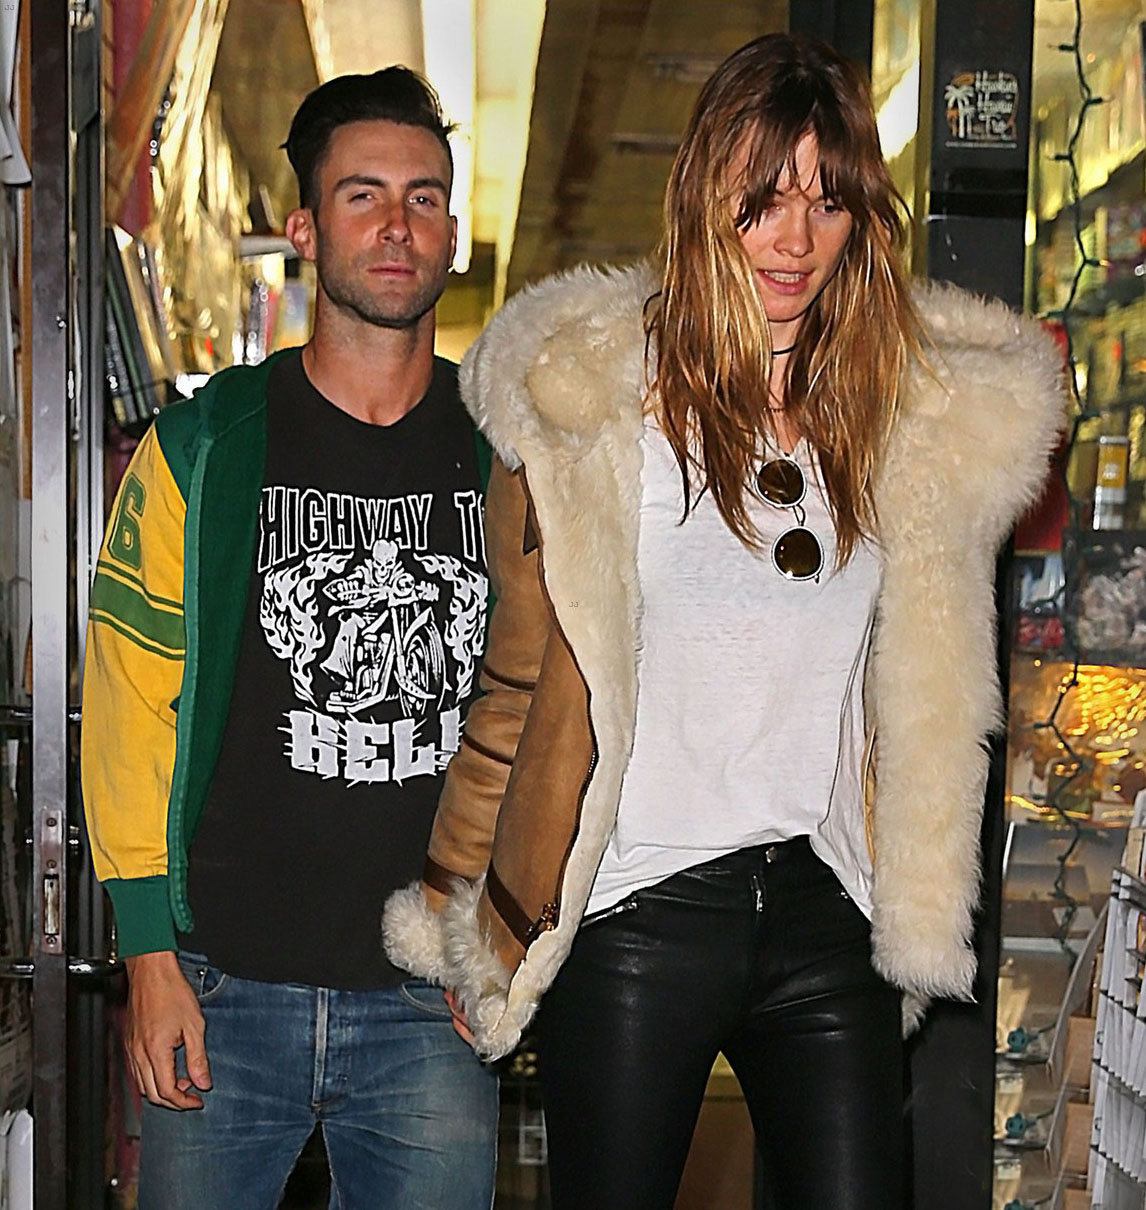 Behati Prinsloo exits the What Goes Around Comes Around vintage store